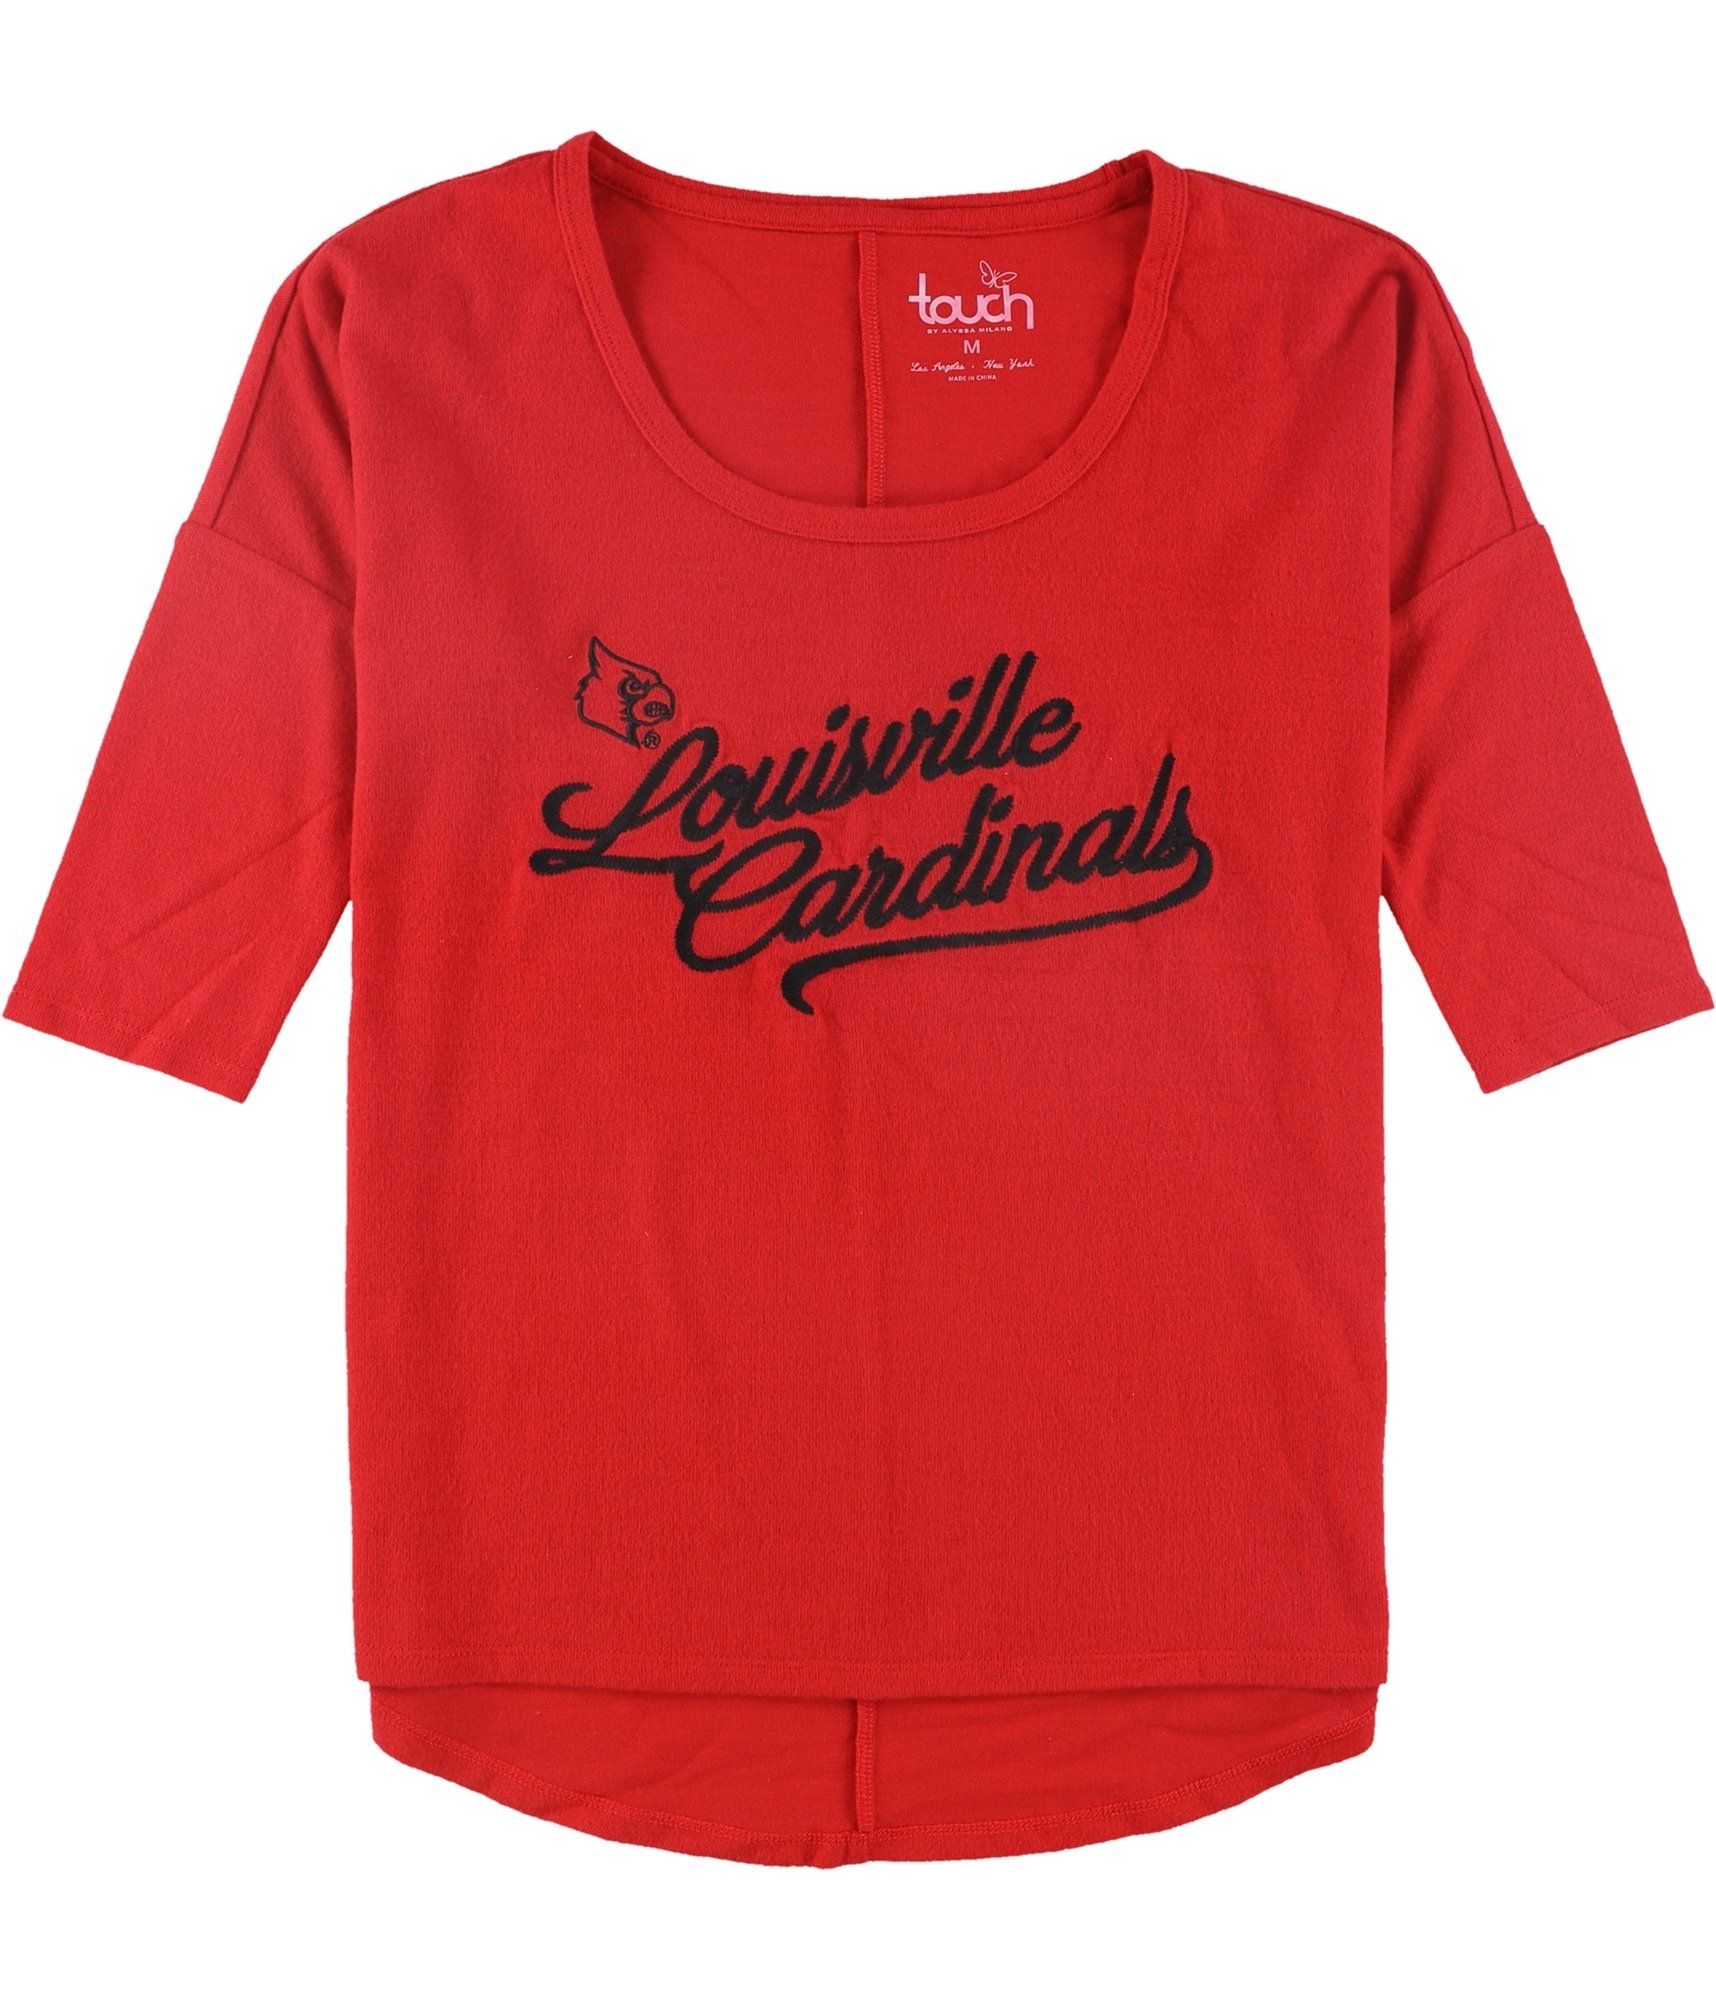 Buy a Womens Touch University Of Louisville Pullover Sweater